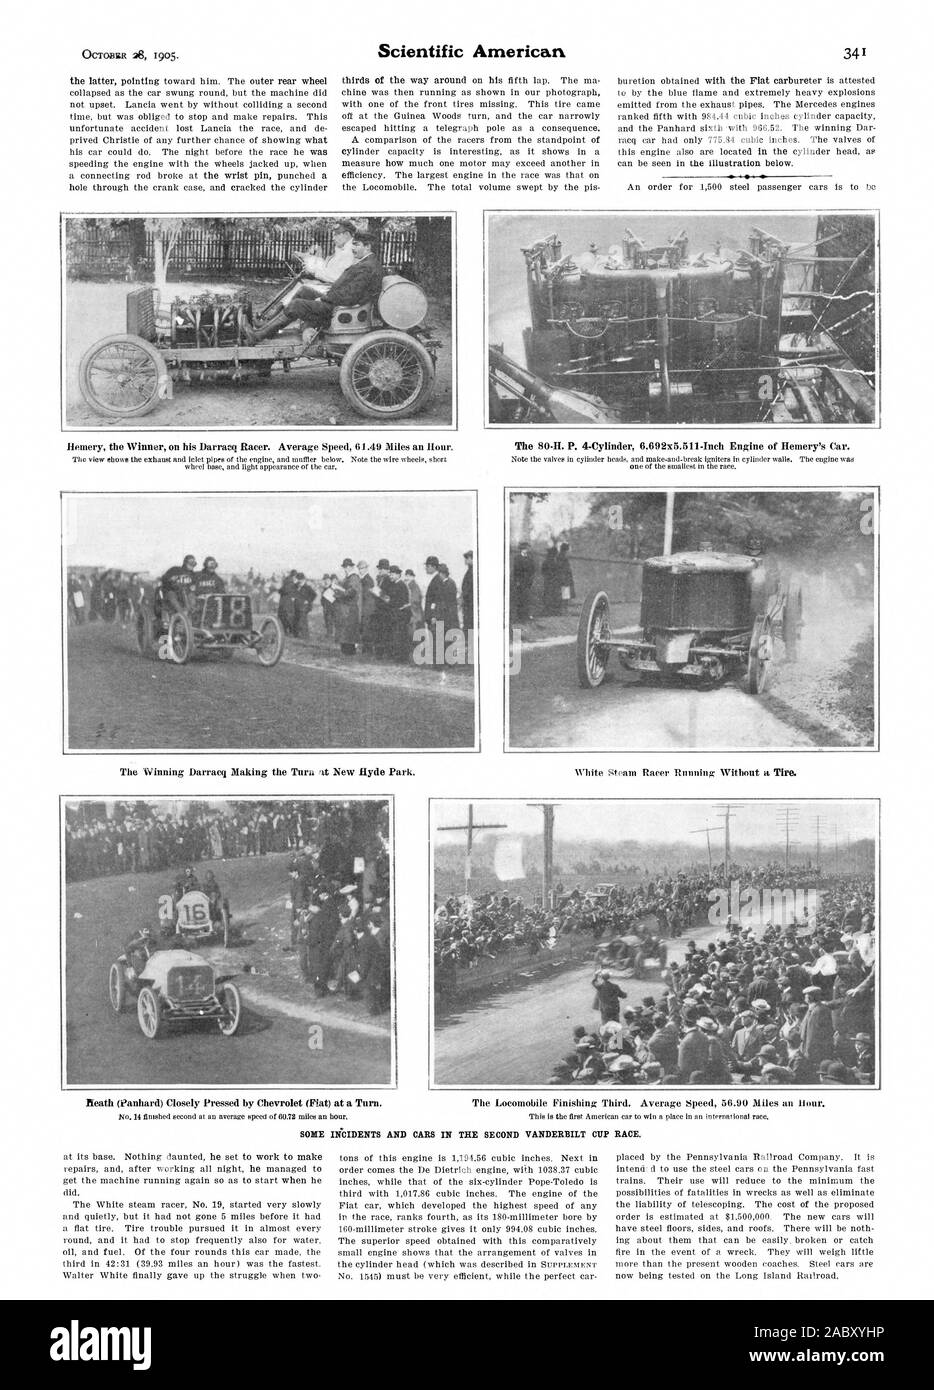 Hemery the Winner on his Darracq Racer. Average Speed 61.49 Miles an Hour. The Winning Darracq Making the Turn at New Hyde Park. Reath (Panhard) Closely Pressed by Chevrolet (Fiat) at a Turn. The .Locomobile Finishing Third. Average Speed 56.90 Miles an Hour., scientific american, 1905-10-28 Stock Photo